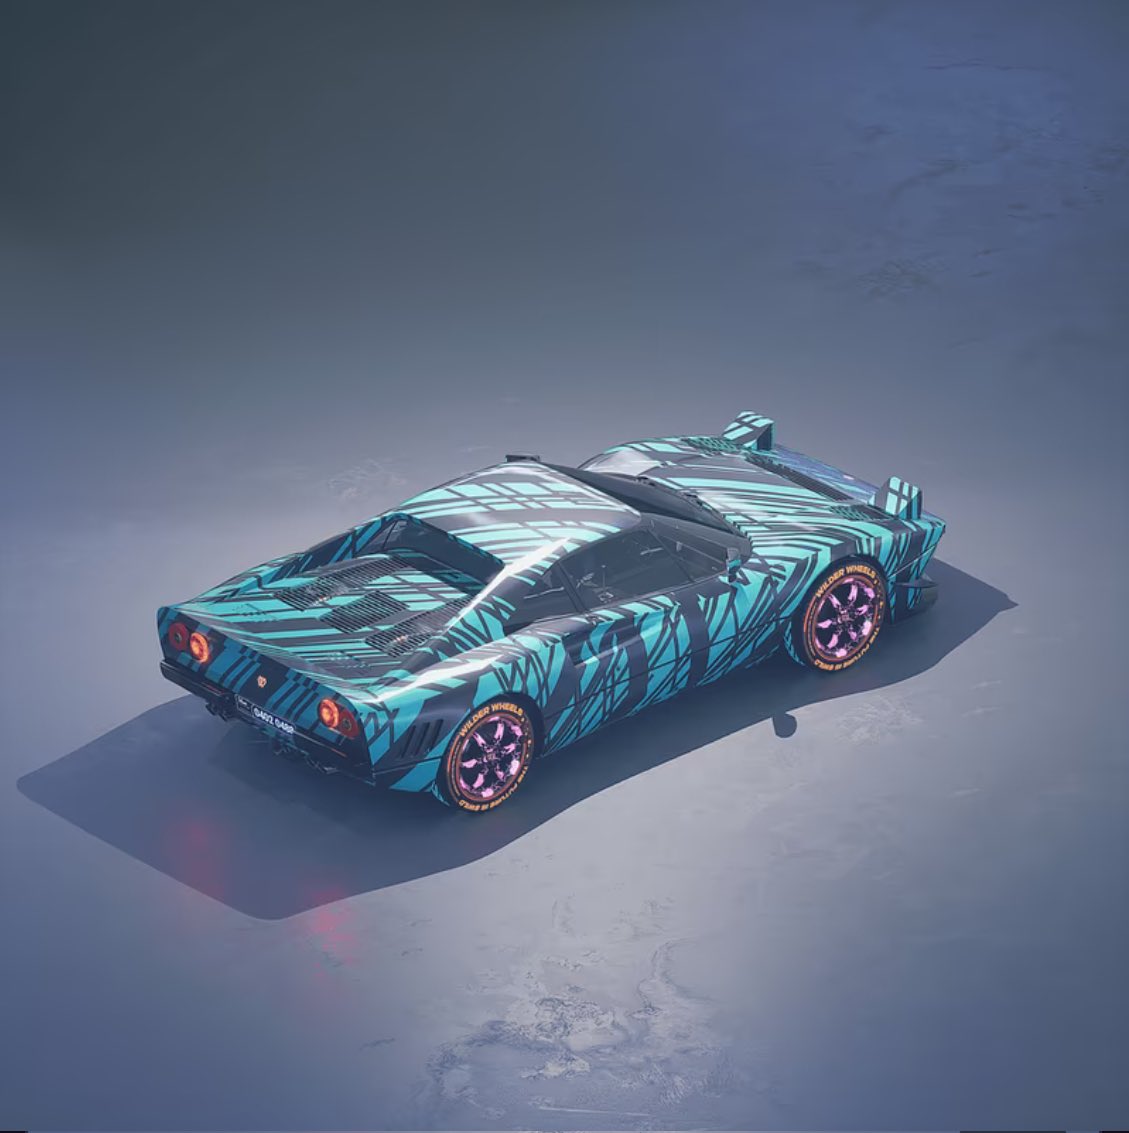 This @WilderWorld Werrari was just too pretty to let sit on the floor. Added to my collection. I guess it’s time to get that second trinity! Take some time to read on this project and the partnerships they have. Big things coming for this community!